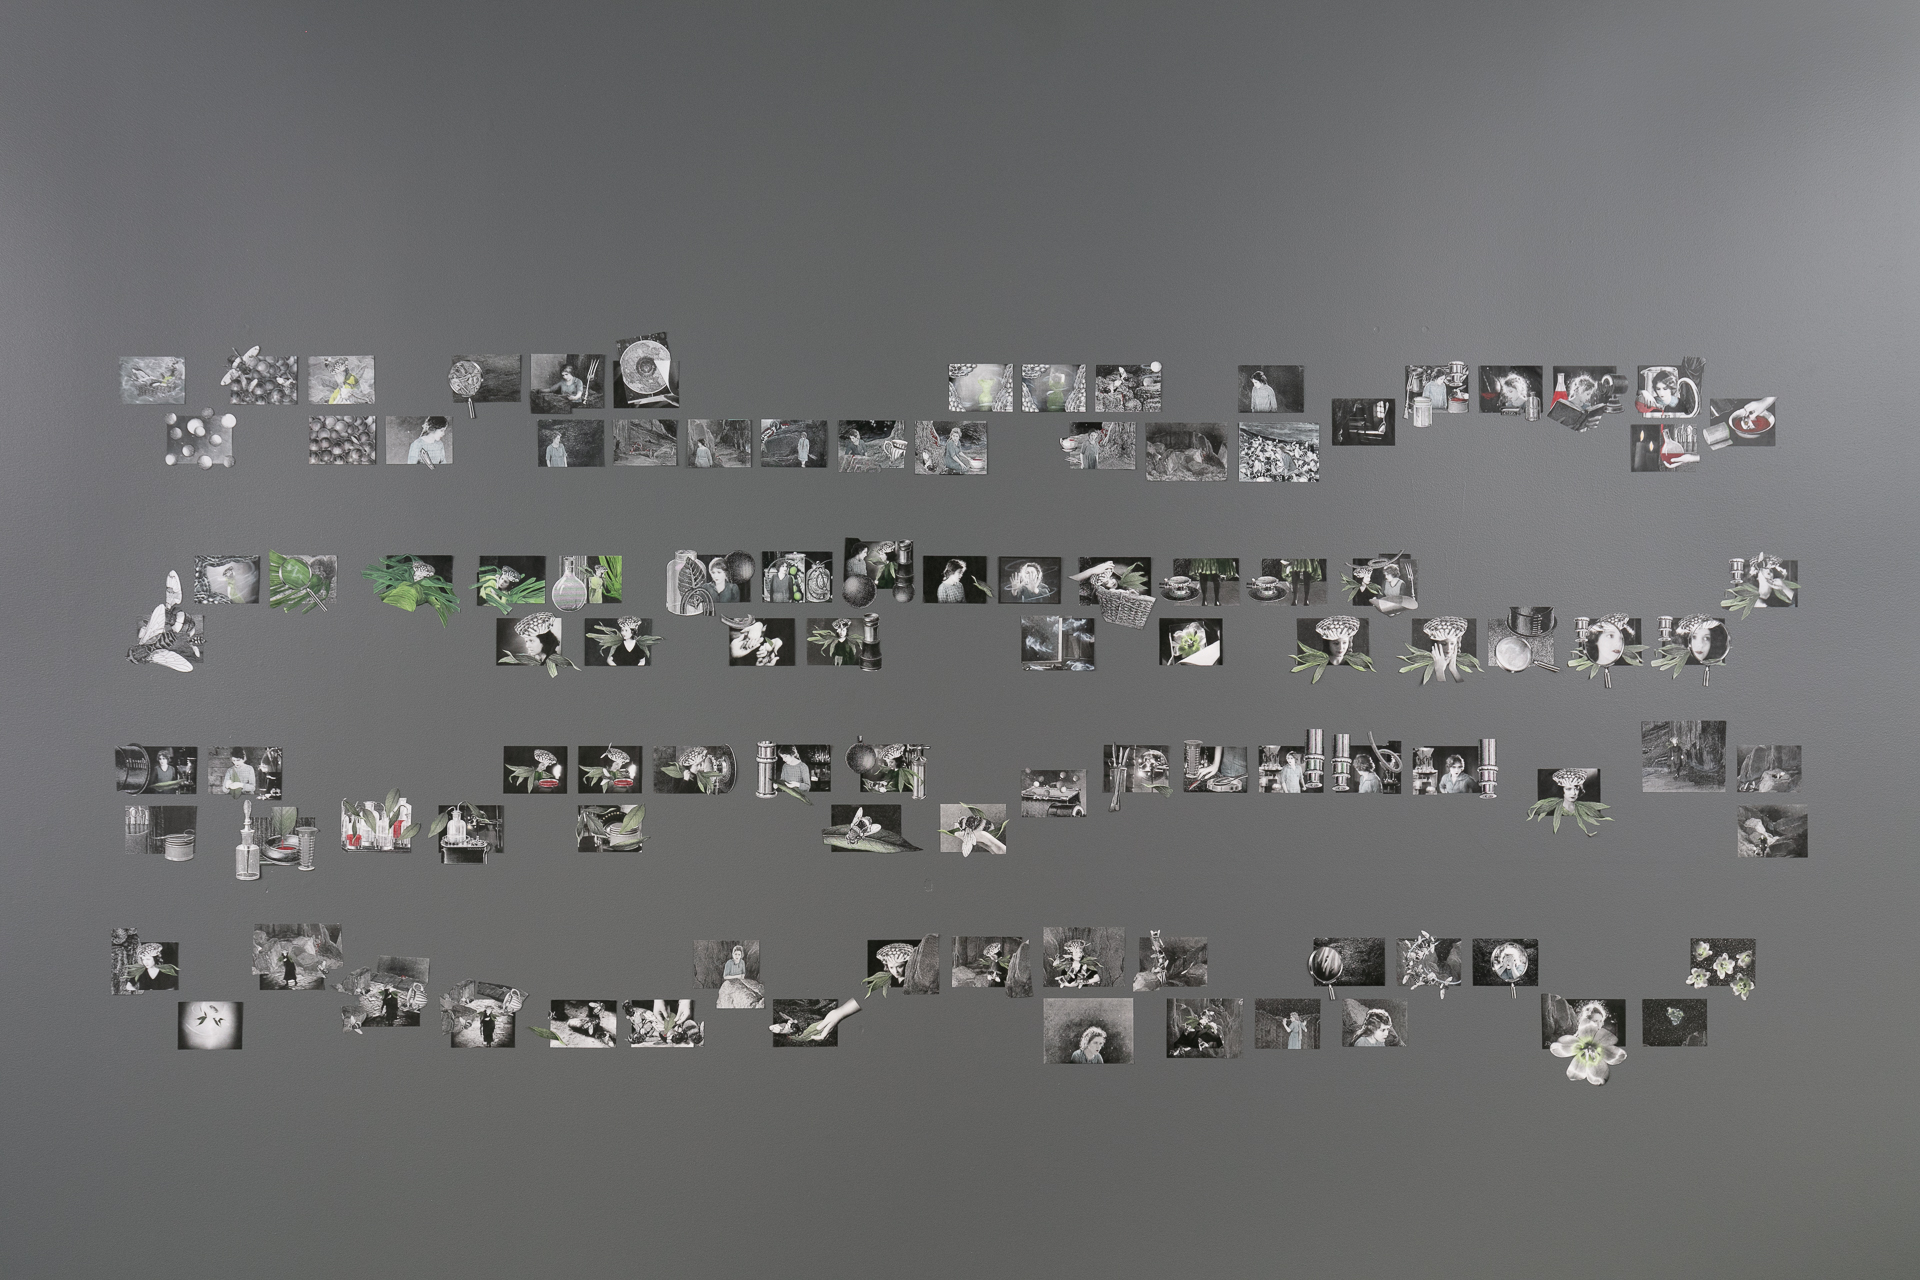 Dozens of frames from an animation are spread out in sequence against a grey background. 